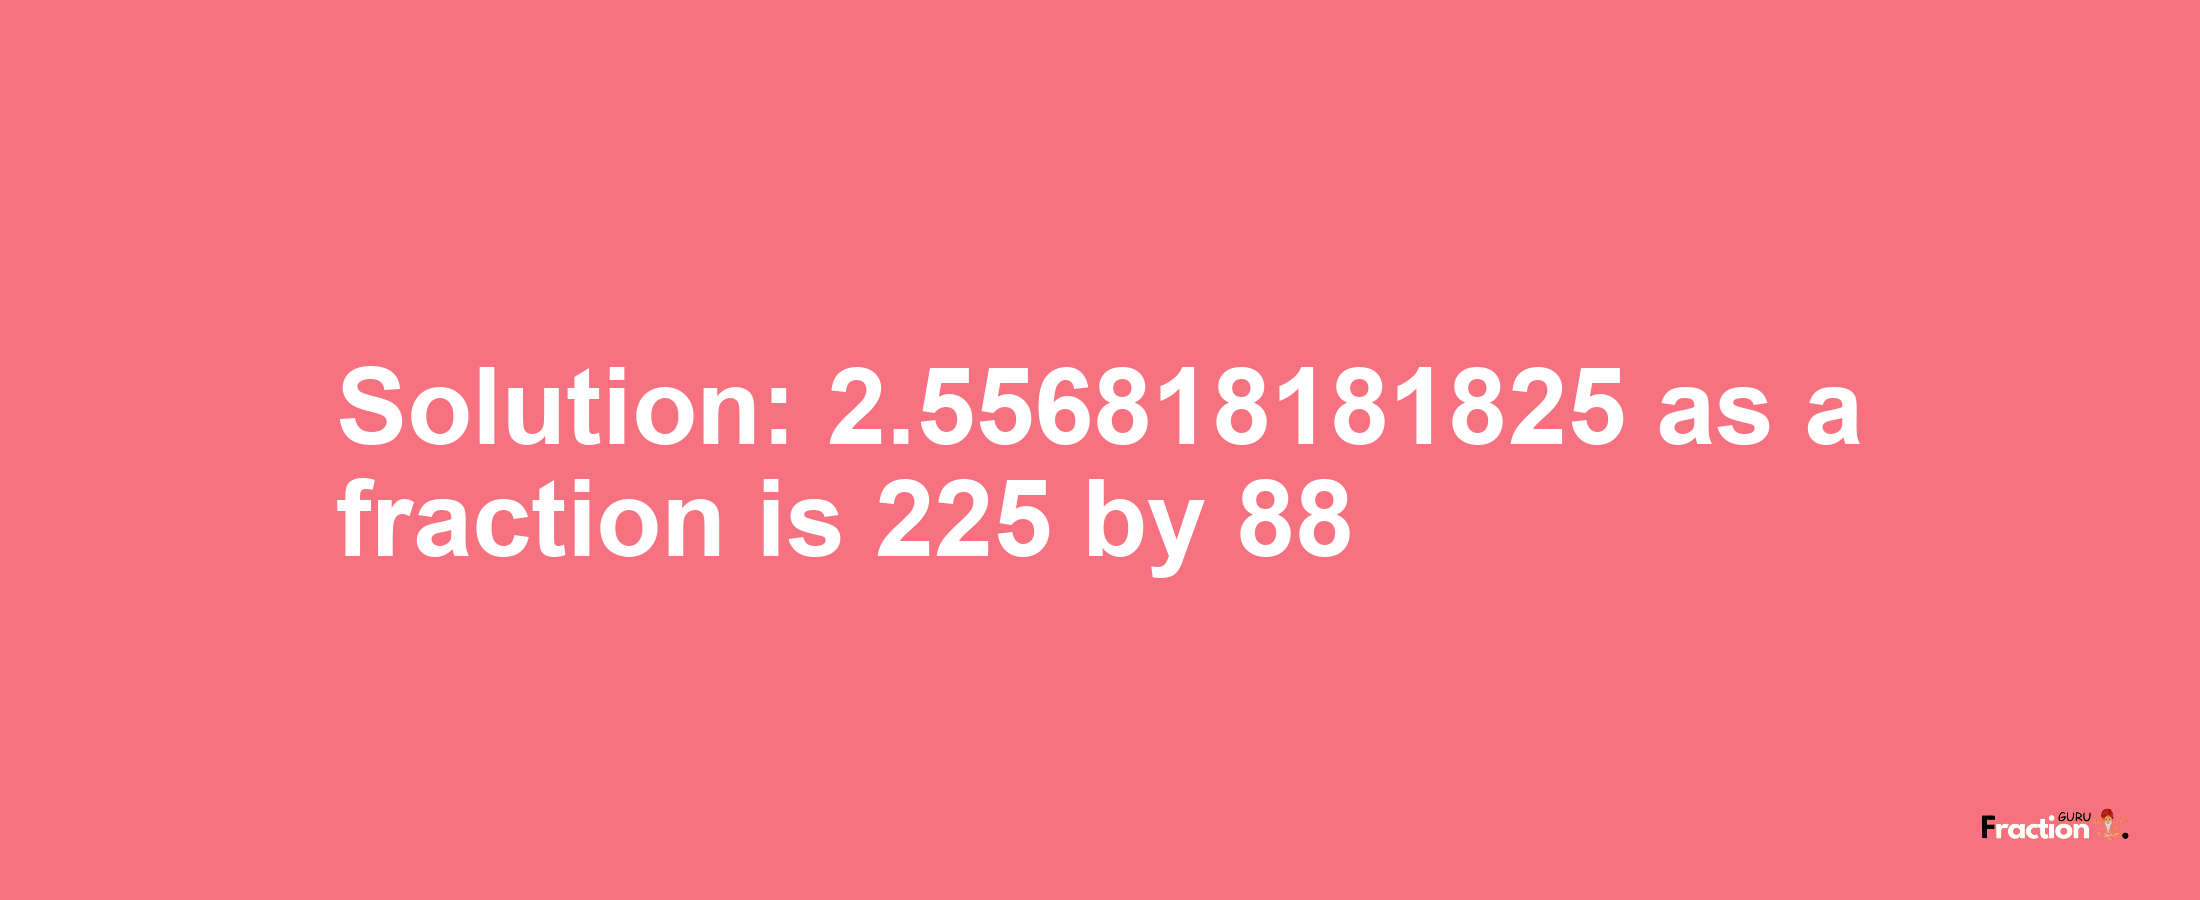 Solution:2.556818181825 as a fraction is 225/88